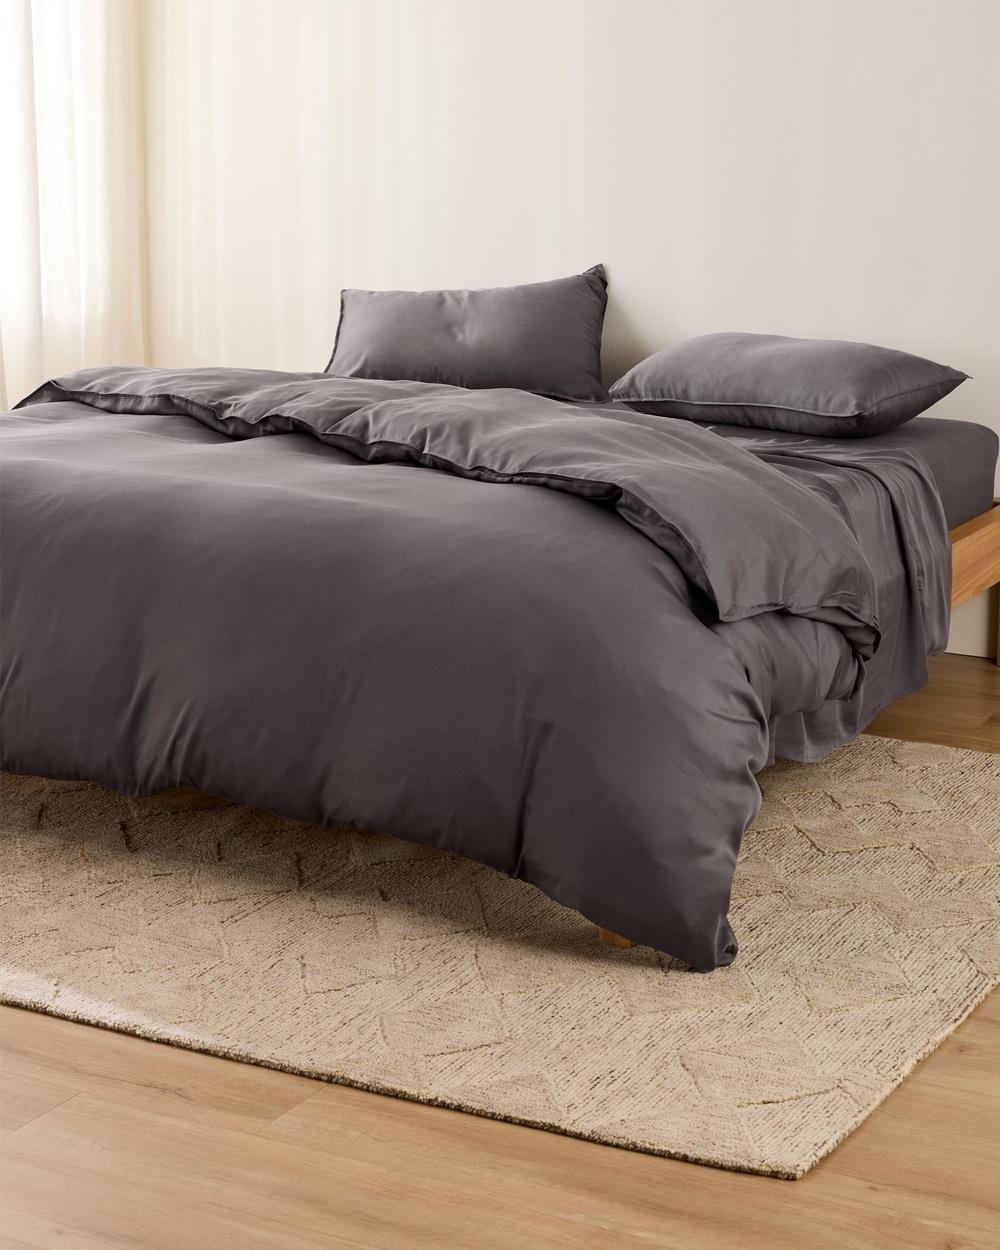 Sheet Society - Kane Bamboo Quilt Cover Set - Home (Grey) Kane Bamboo Quilt Cover Set